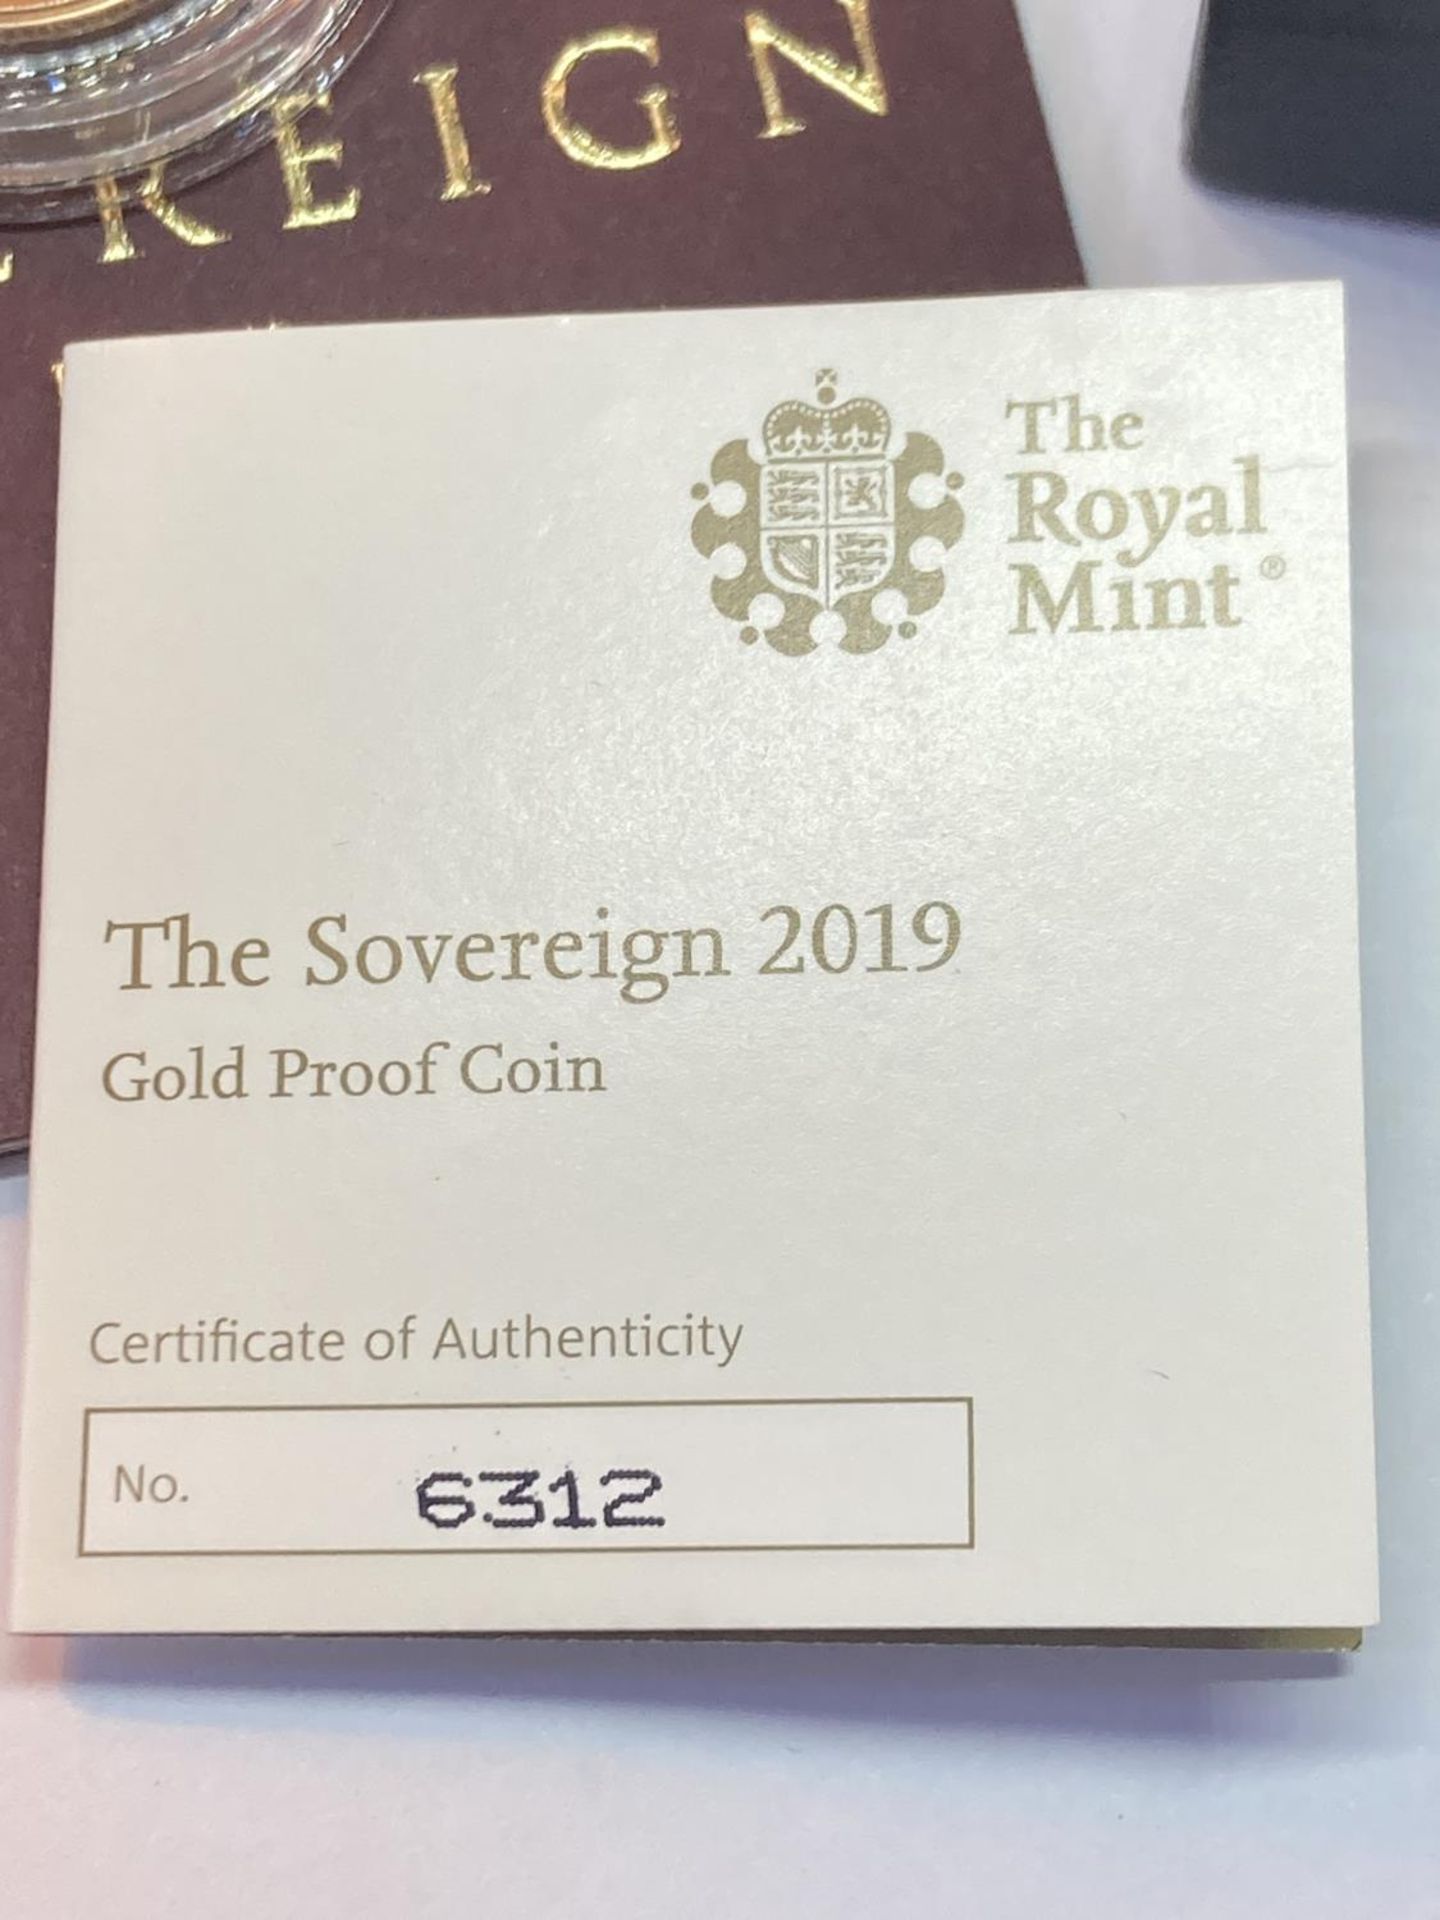 A 2019 THE SOVEREIGN GOLD PROOF LIMITED EDITION NUMBER 6,312 OF 9,500 IN A WOODEN BOXED CASE - Bild 4 aus 5